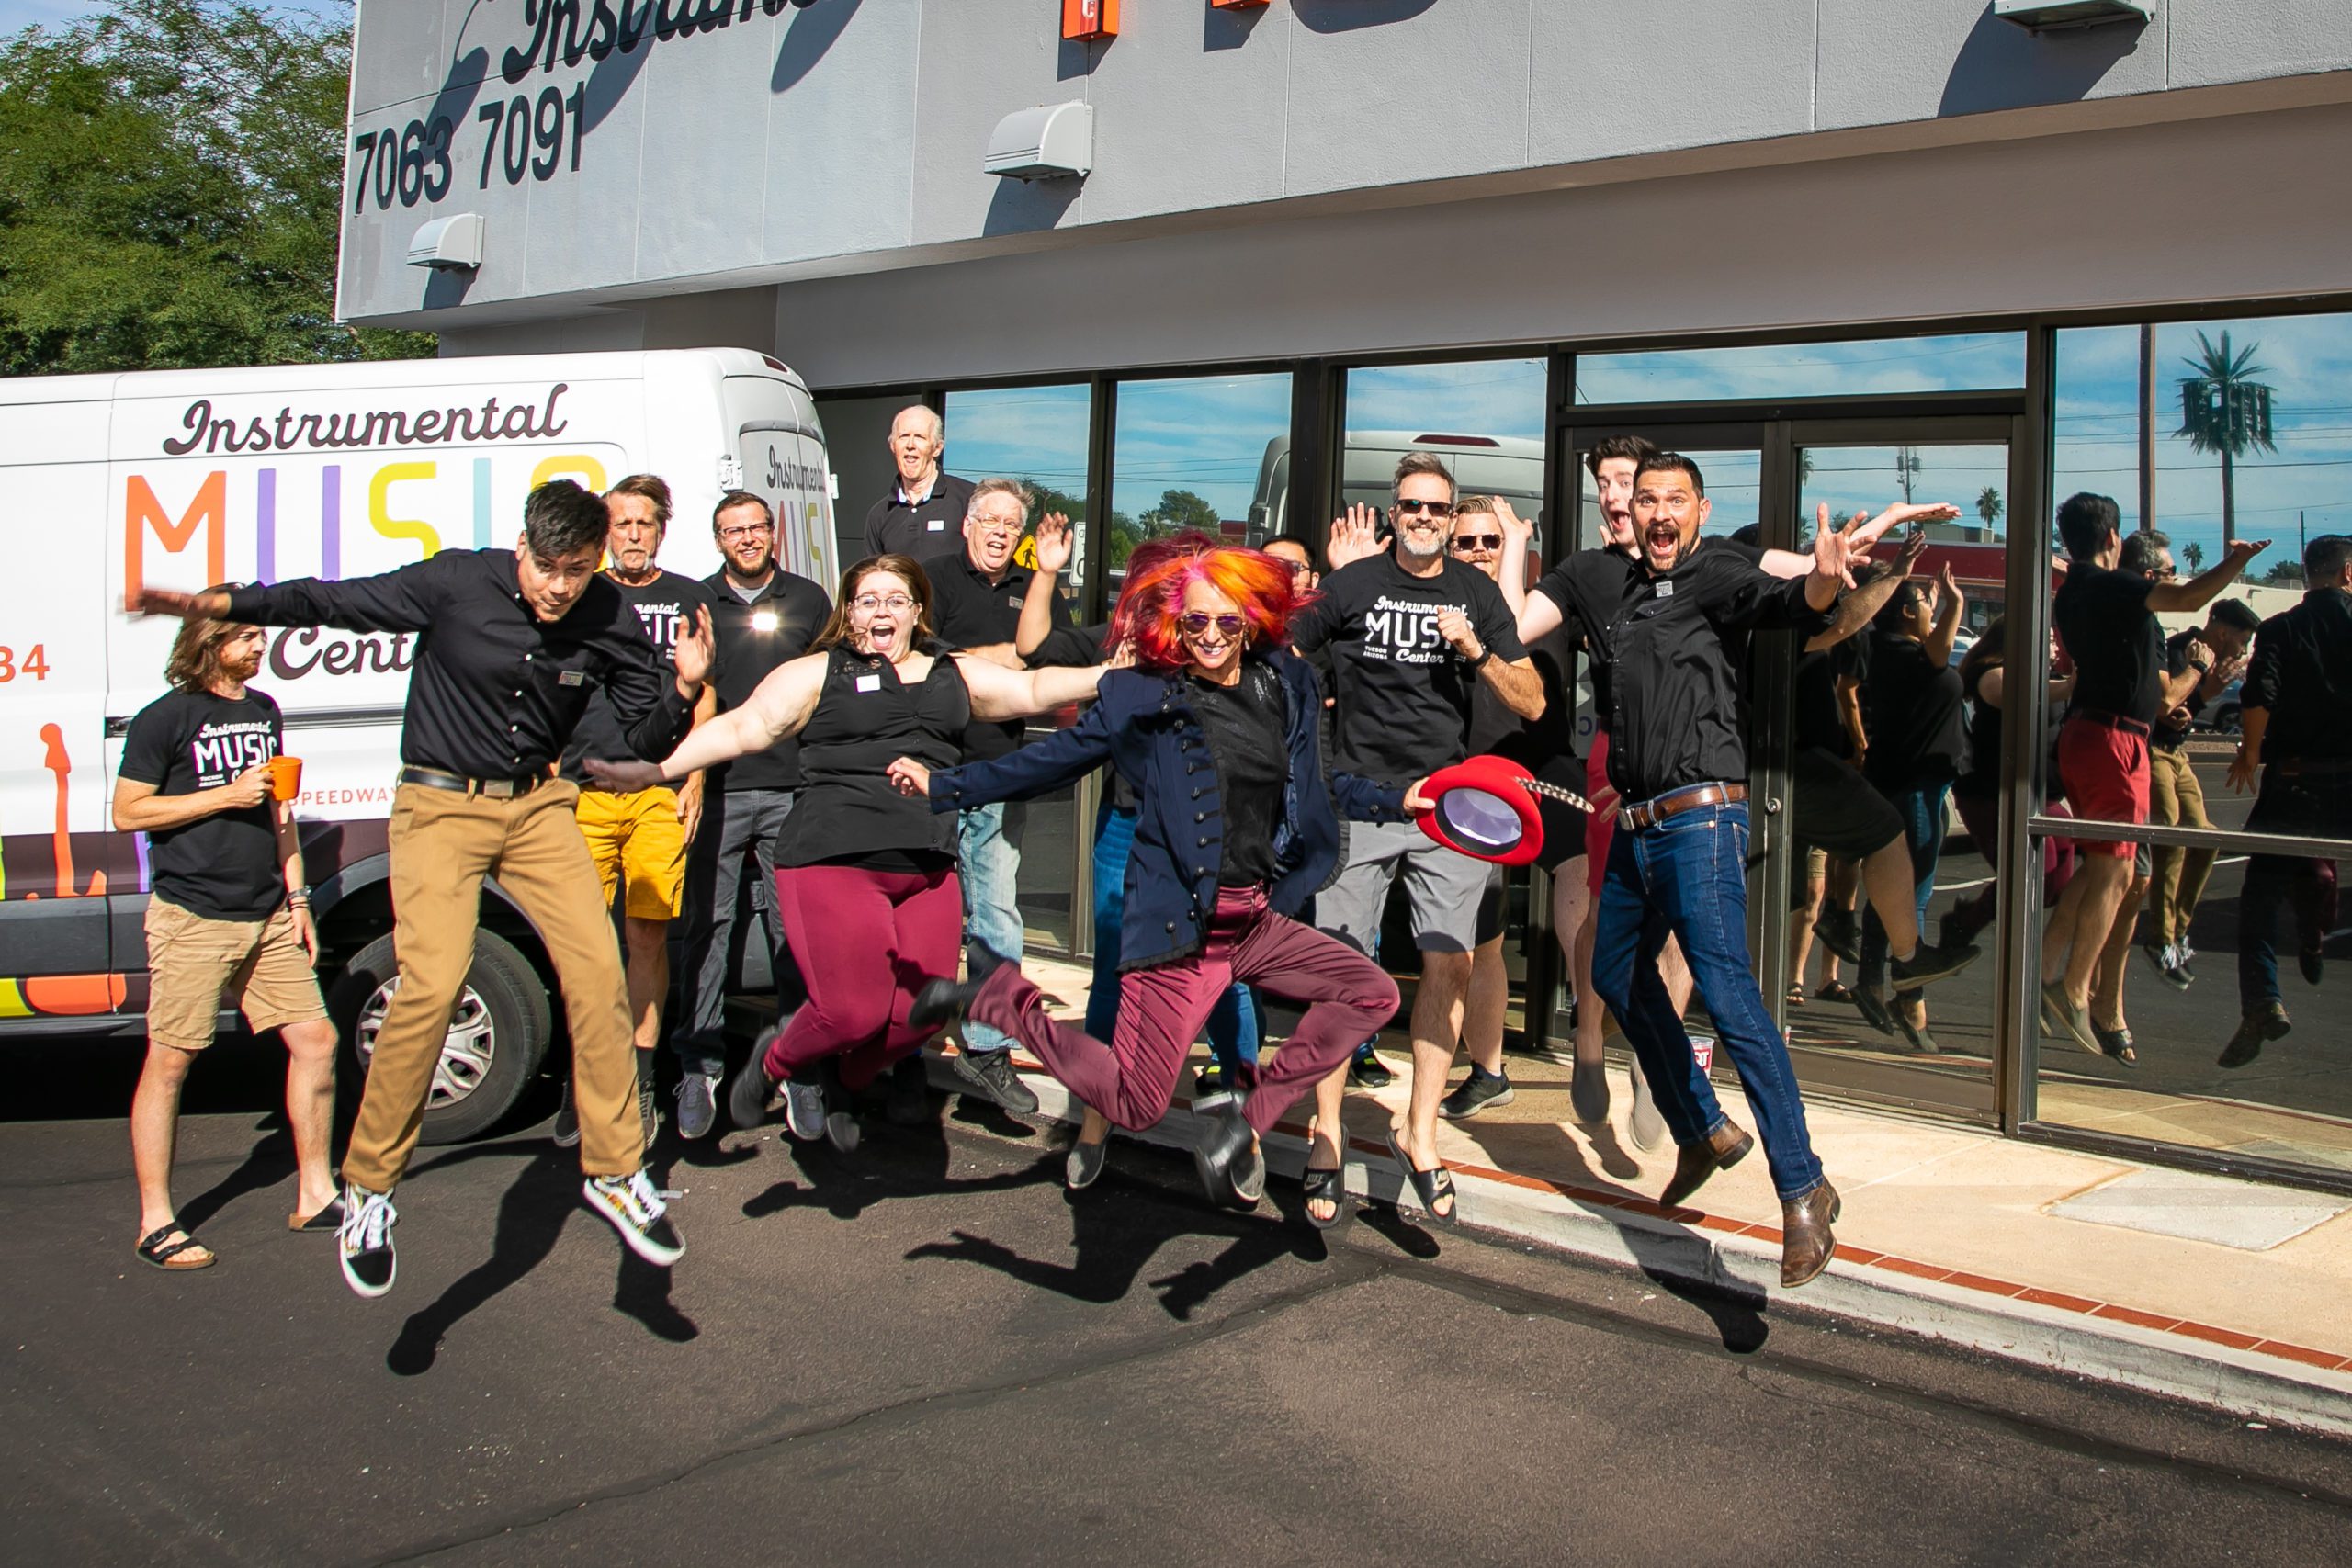 Leslie Stirm, owner of Instrumental Music Inc in Tucson AZ and her staff jump in the air to illustrate that they are a fun group and business. Kathleen's images from their session were featured in the national magazine, Music Inc., December 2021 edition.